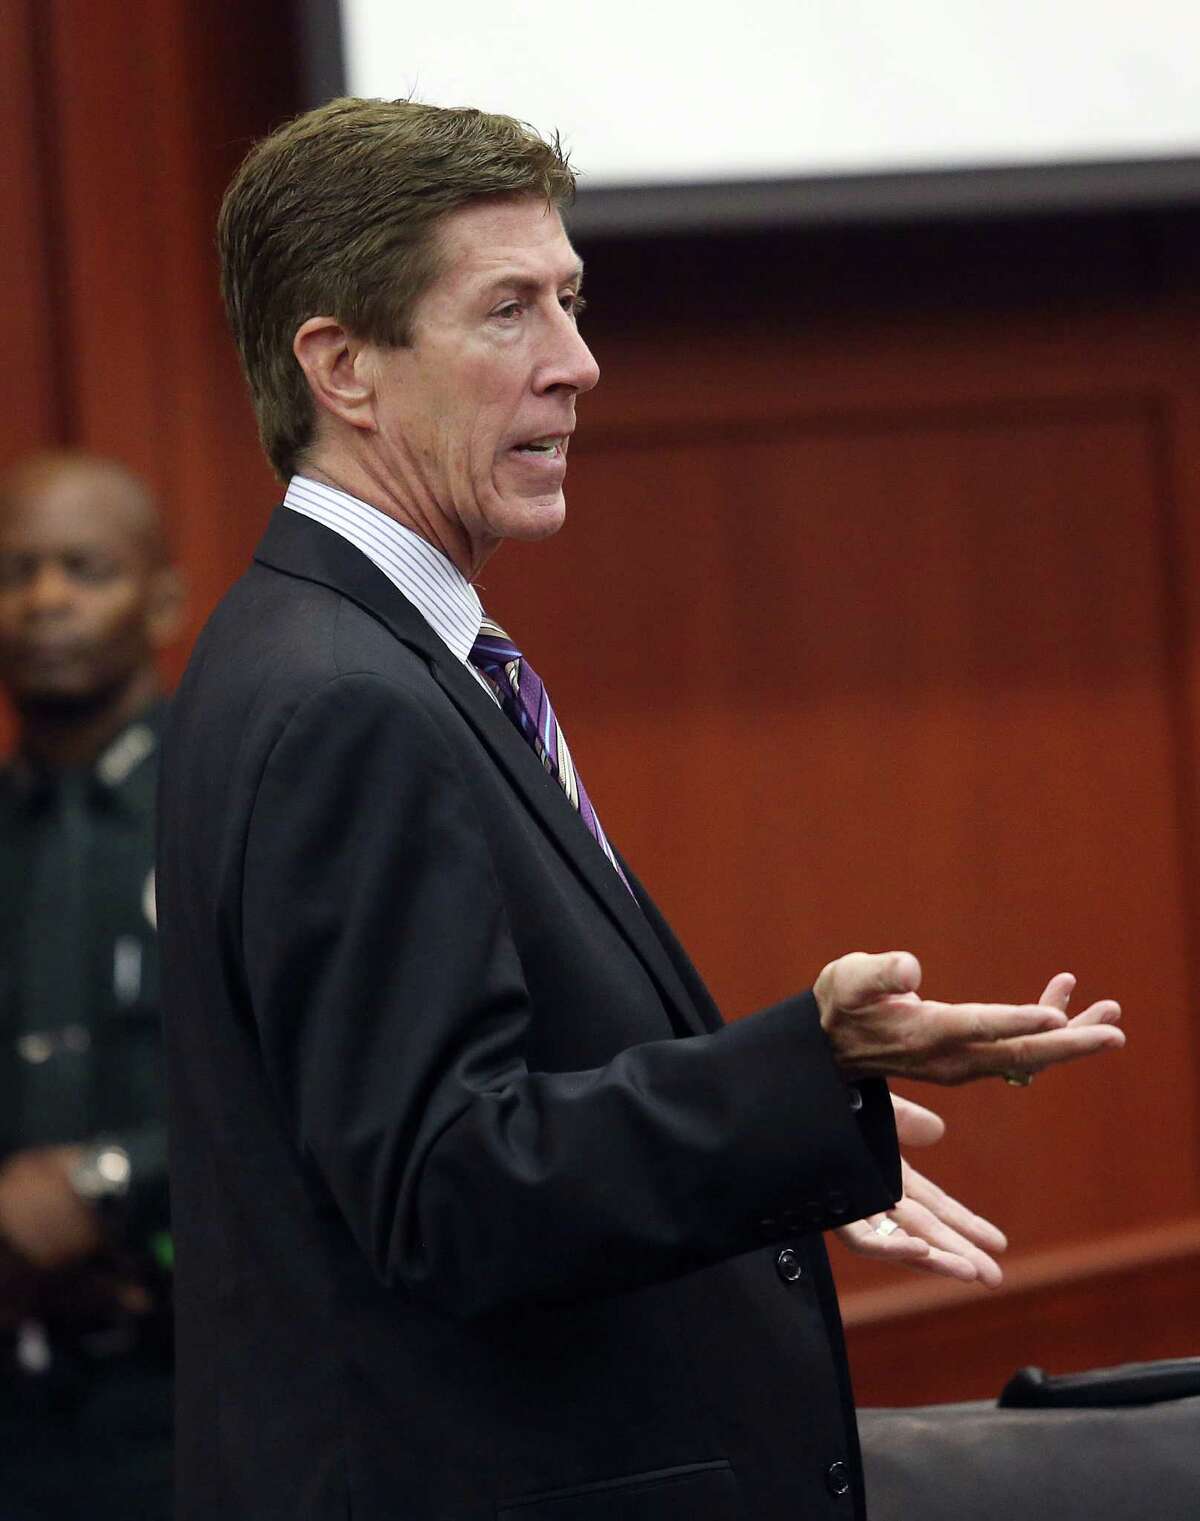 Defense attorney Mark O'Mara addresses judge Debra Nelson during the trial of George Zimmerman in Seminole County circuit court, in Sanford, Fla., Wednesday, July 3, 2013. Zimmerman is charged with second-degree murder in the fatal shooting of Trayvon Martin, an unarmed teen, in 2012. (AP Photo/Orlando Sentinel, Jacob Langston, Pool)